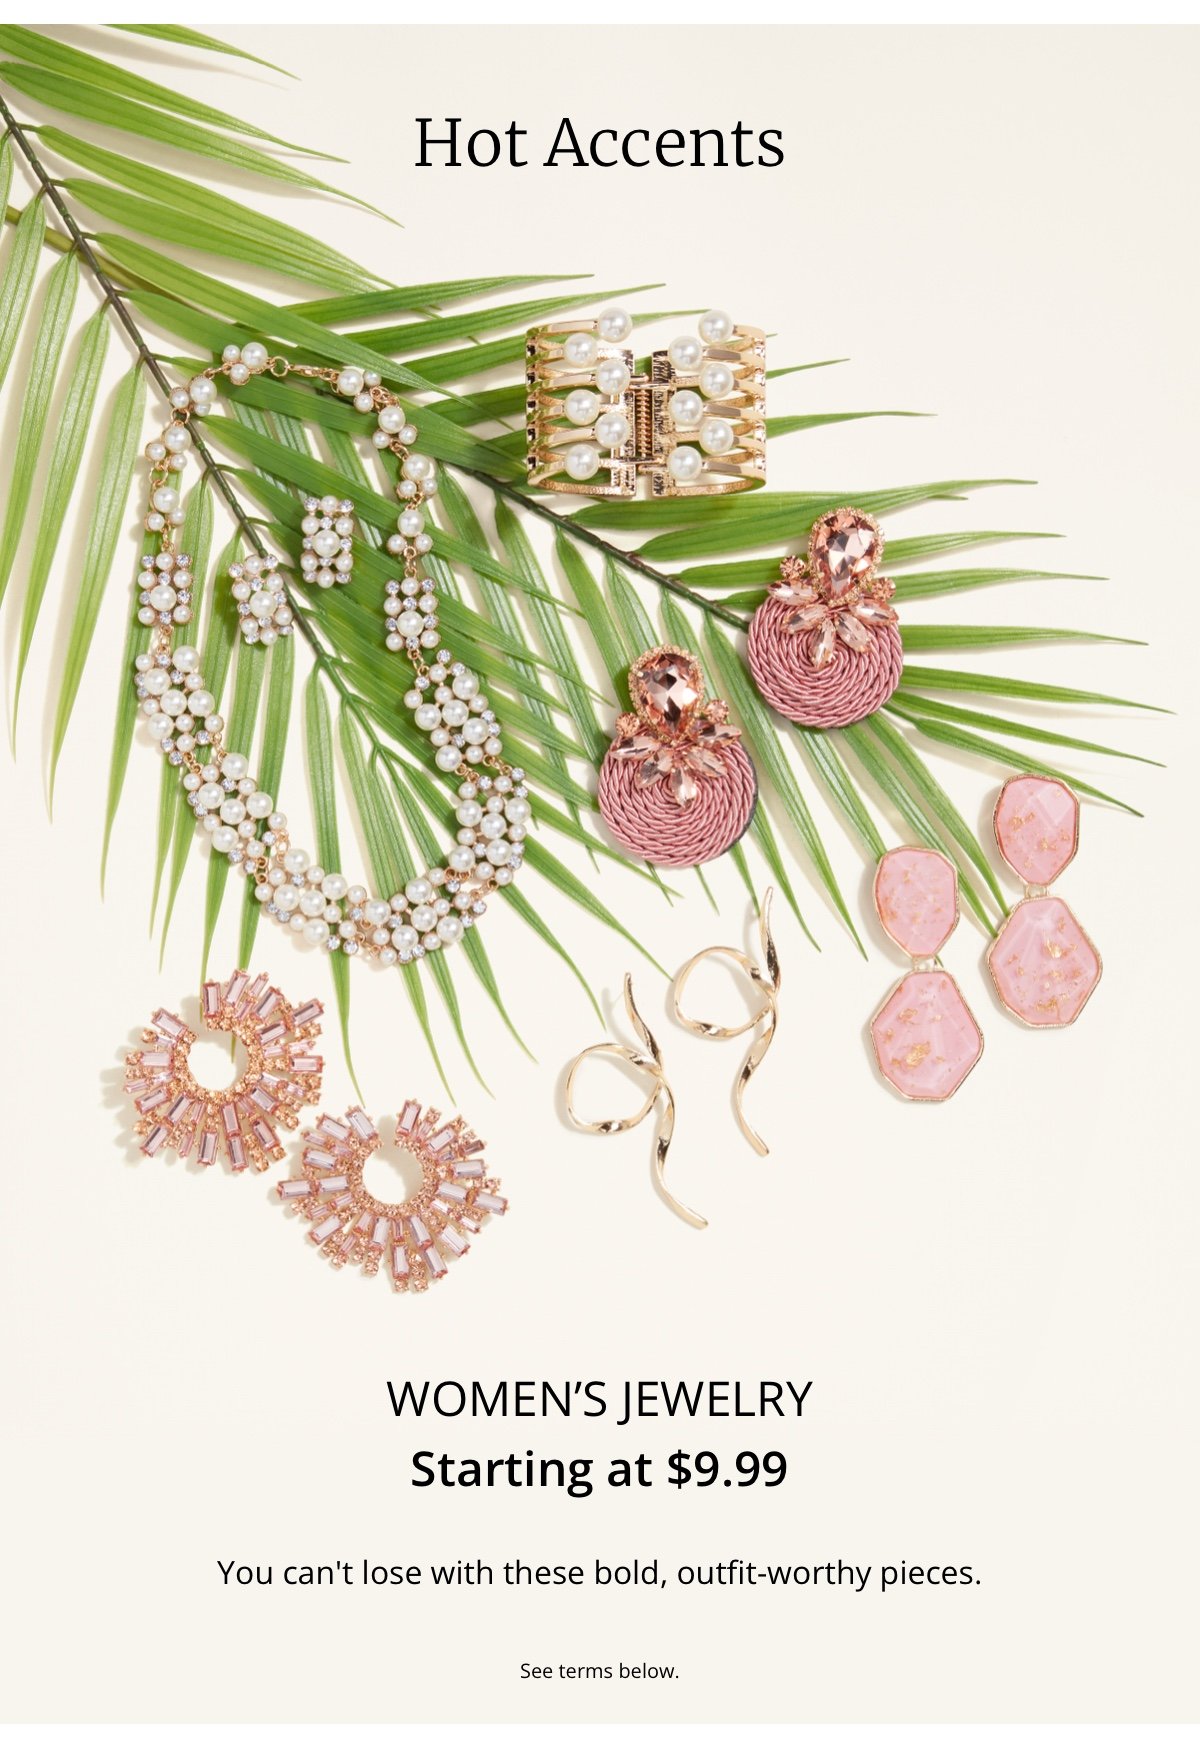 Hot Accents|Women’s Jewelry|Starting at \\$9.99|You can t lose with these bold, outfit-worthy pieces.|See terms below.